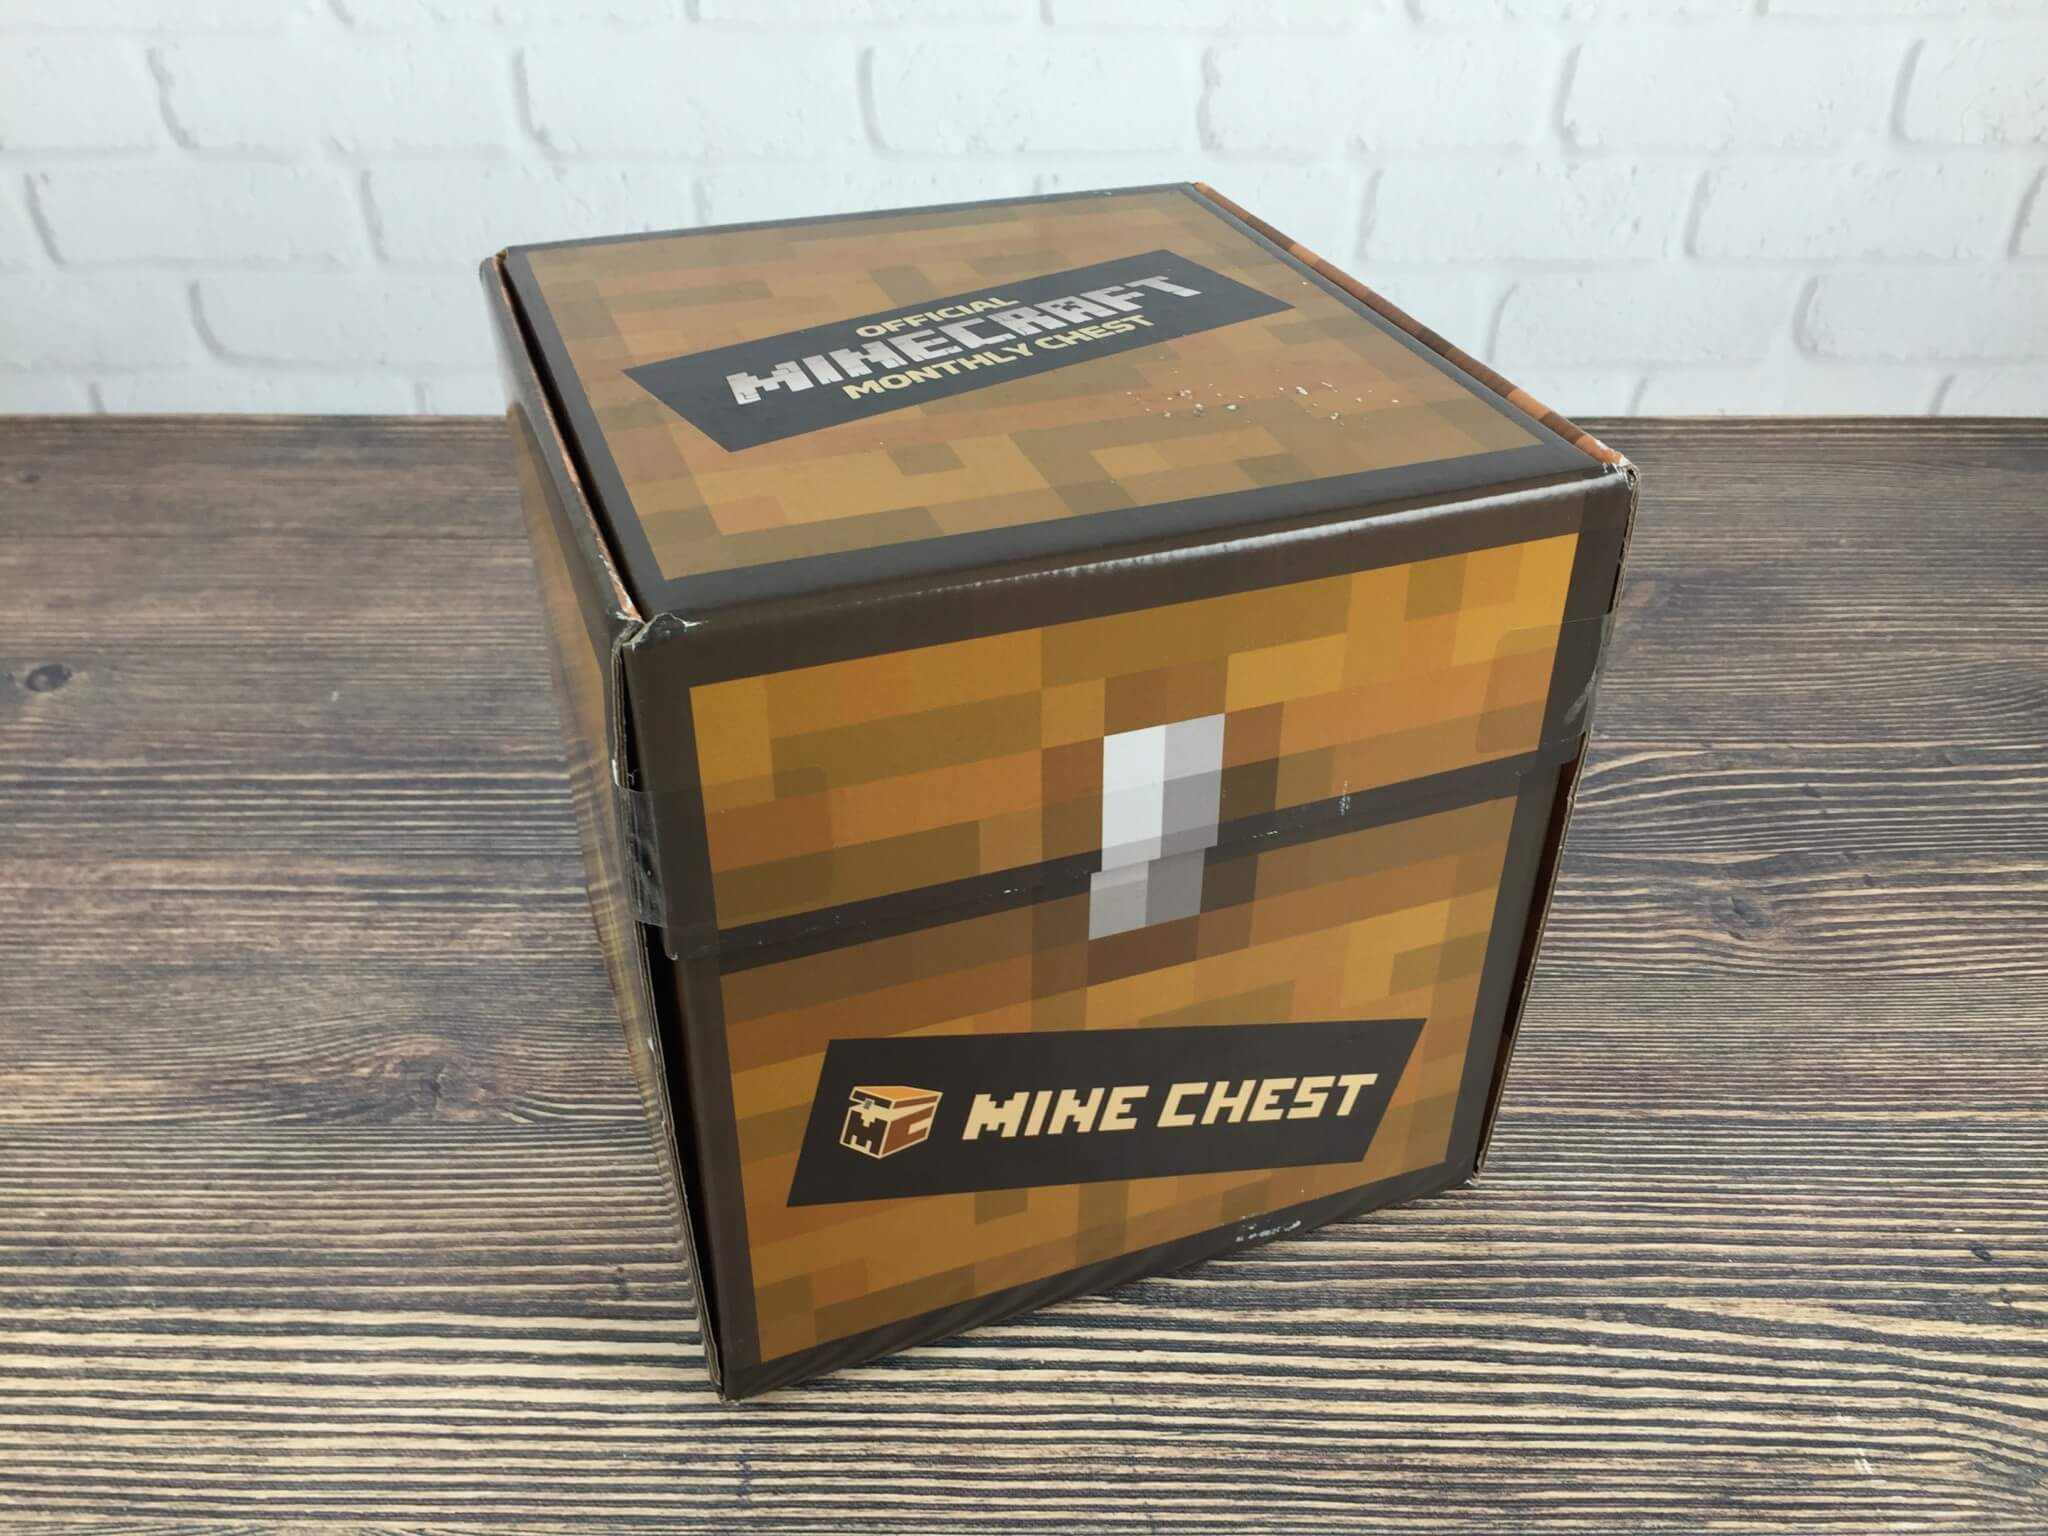 Mine Chest August 2016 Subscription Box Review - Survive the Night ...